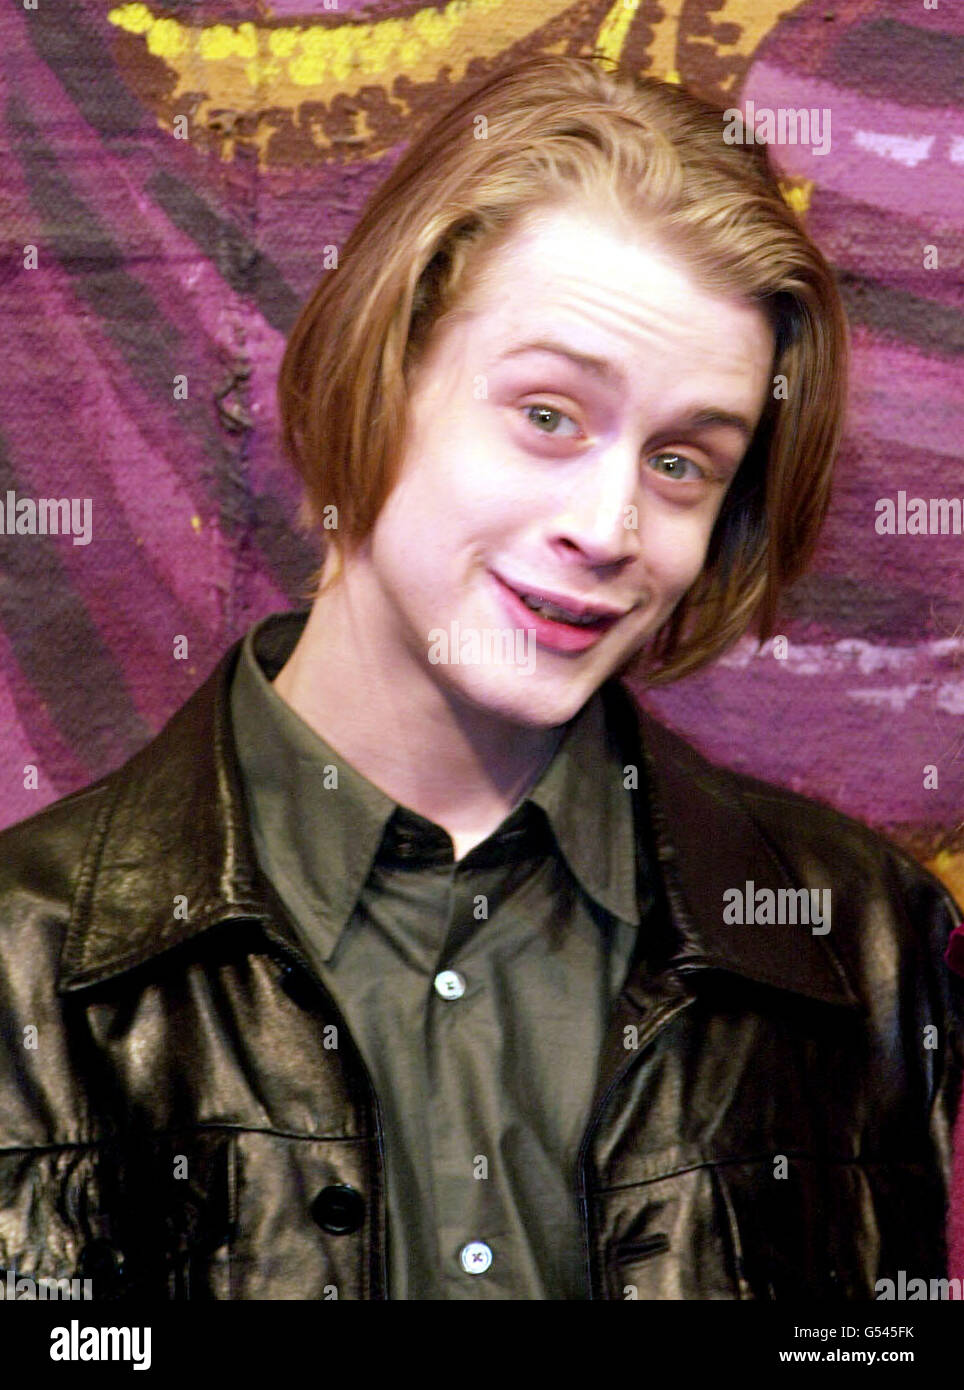 American actor Macaulay Culkin, who starred in the film Home Alone, at the Vaudeville Theatre in London. Culkin makes his West End debut in a new play by Richard Nelson, entitled Madam Melville. He plays Carl, a young American in Paris in 1966. *... who is seduced by the title character played by Irene Jacobs. The play has its world premiere on October 18 2000. Stock Photo